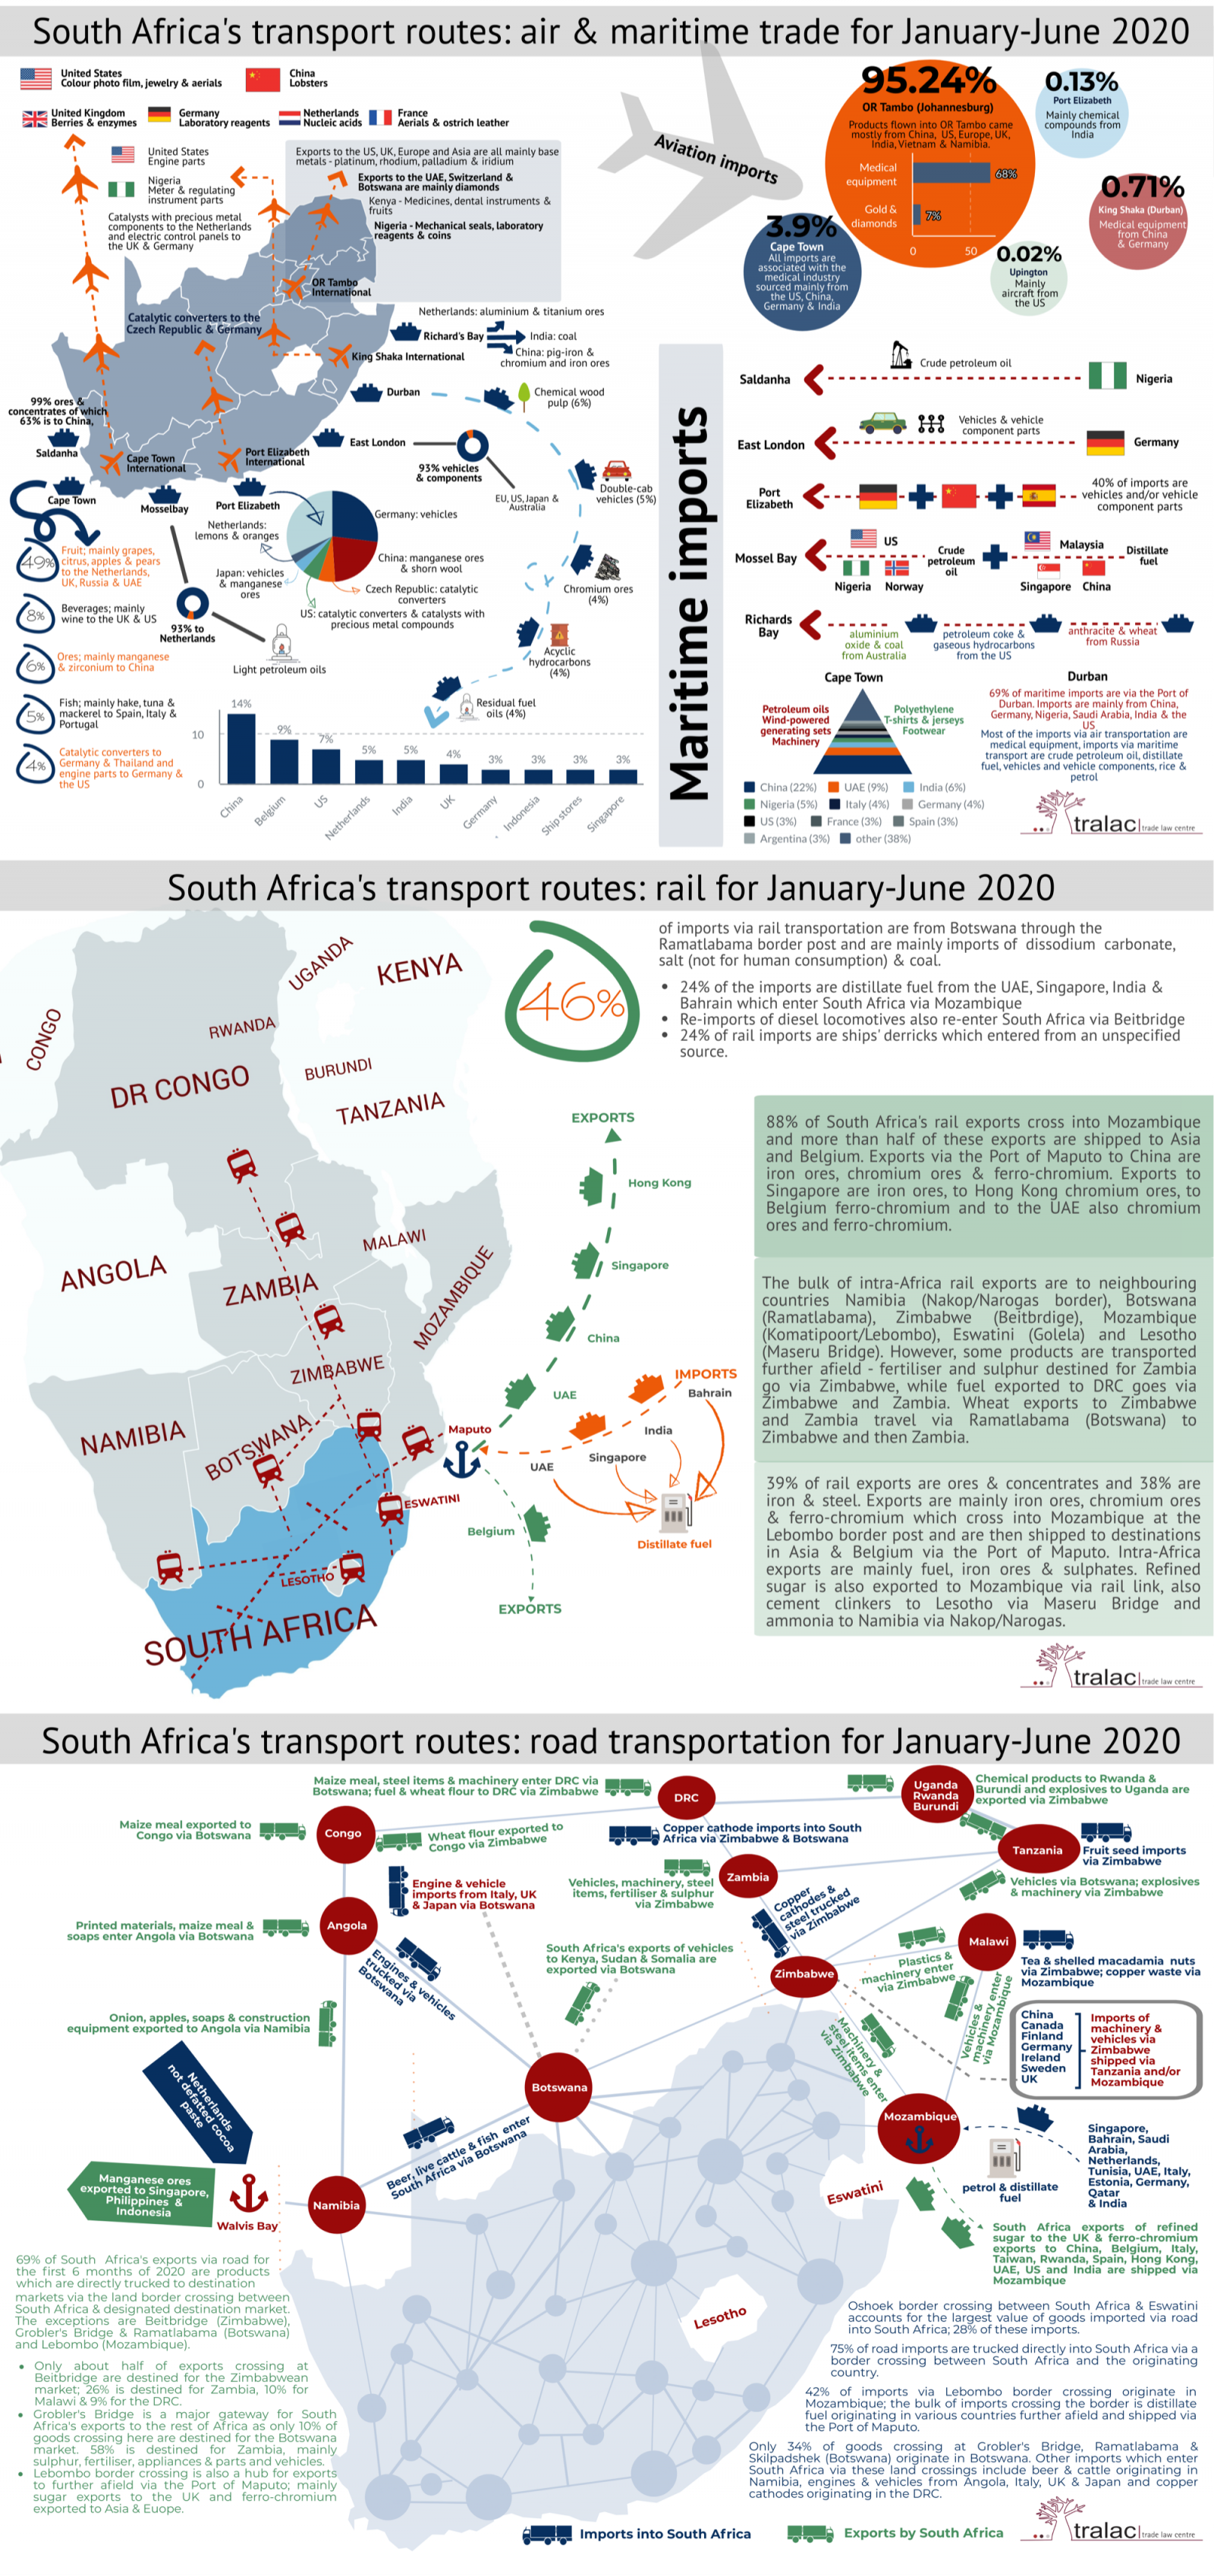 South Africa’s transport routes: trade by air, maritime shipping, rail and road for January to June 2020